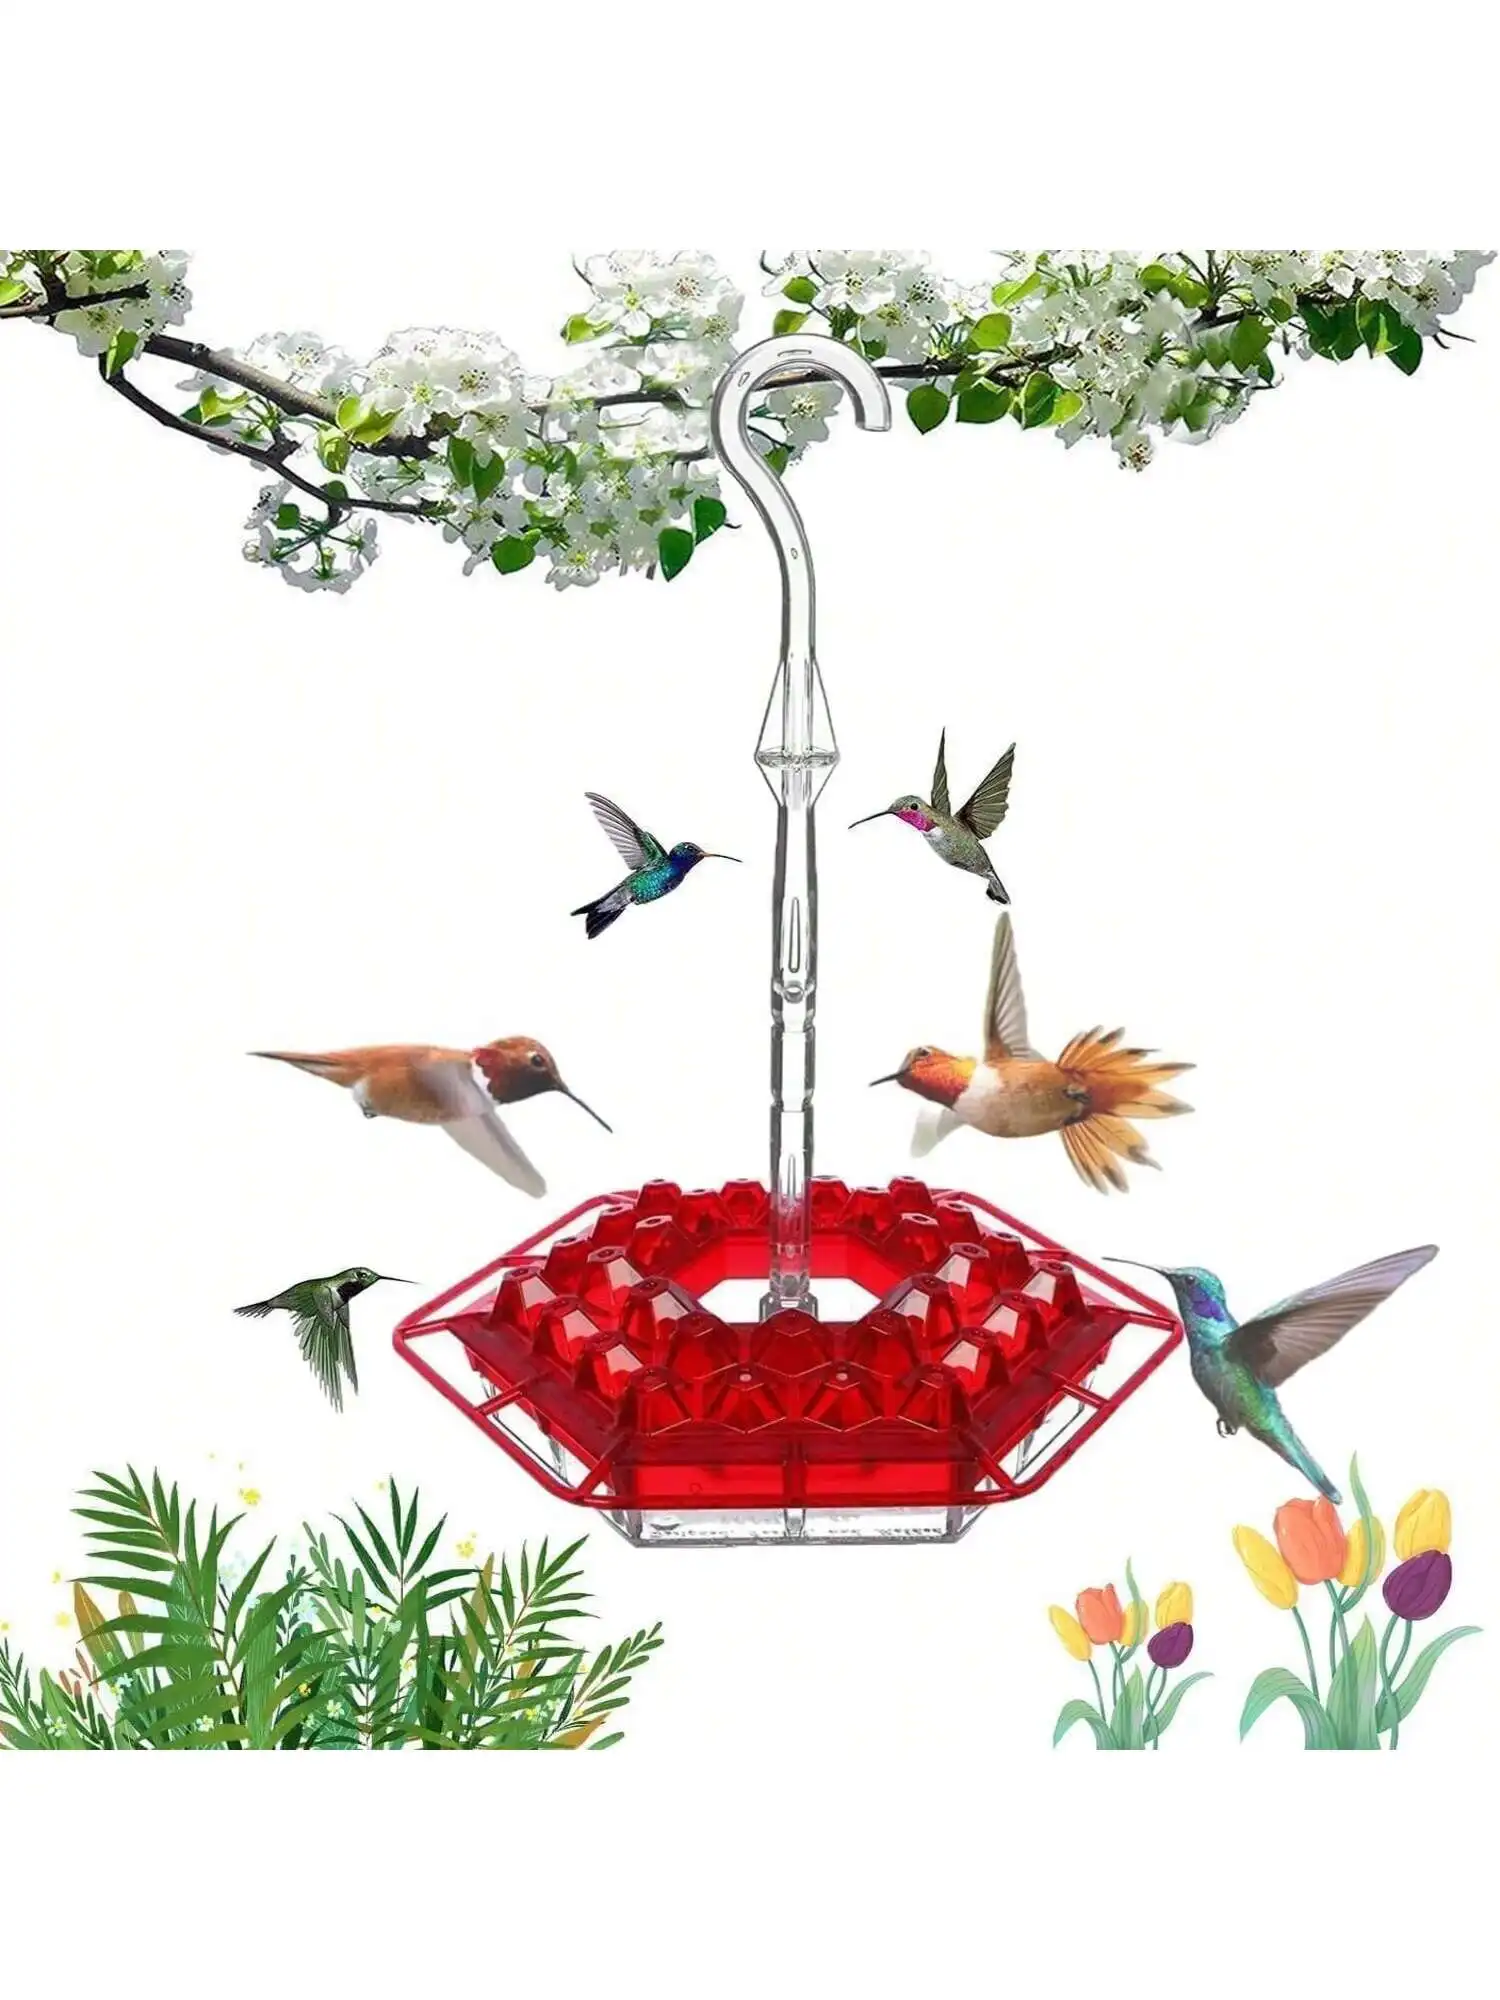 Hummingbird feeder, wind chime hummingbird, wind chime bee outdoor hanging 30 feeding ports, easy to clean